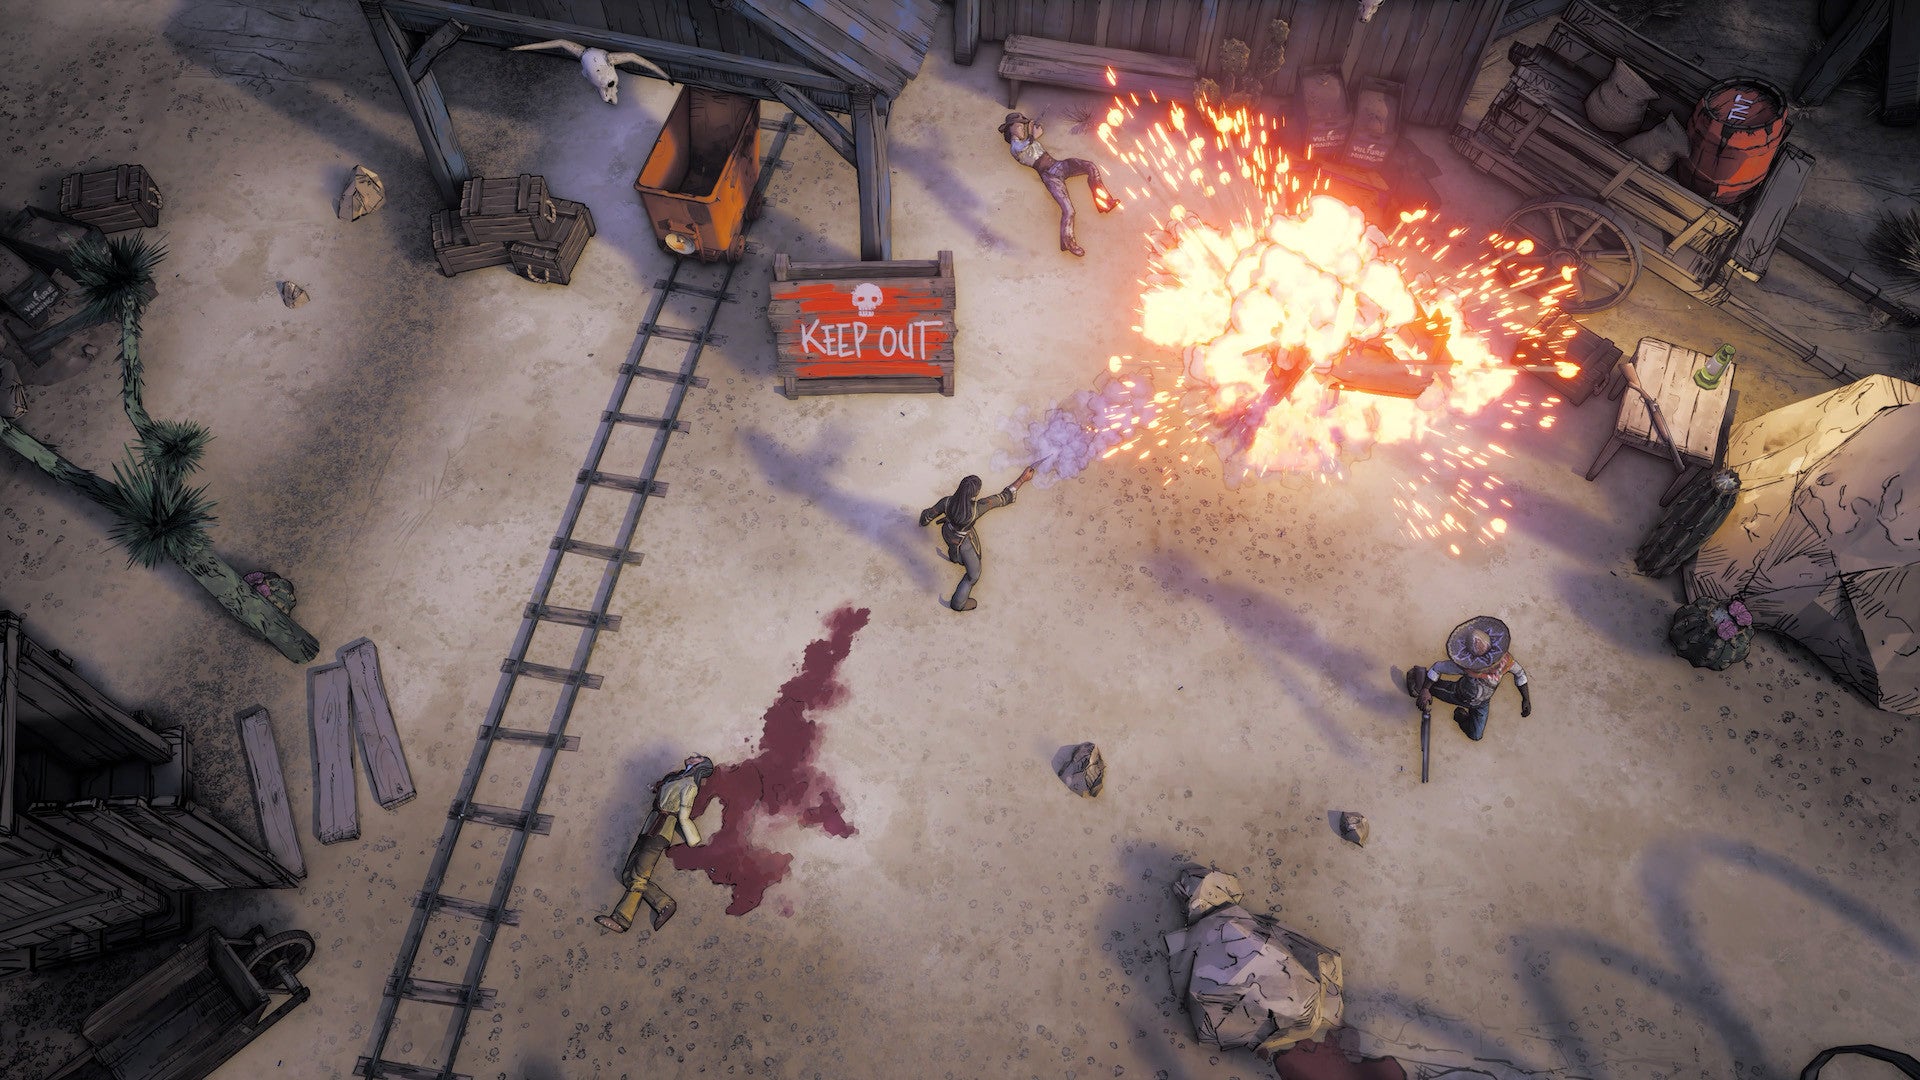 Image for Devolver Digital-published isometric RPG Weird West delayed to March 31